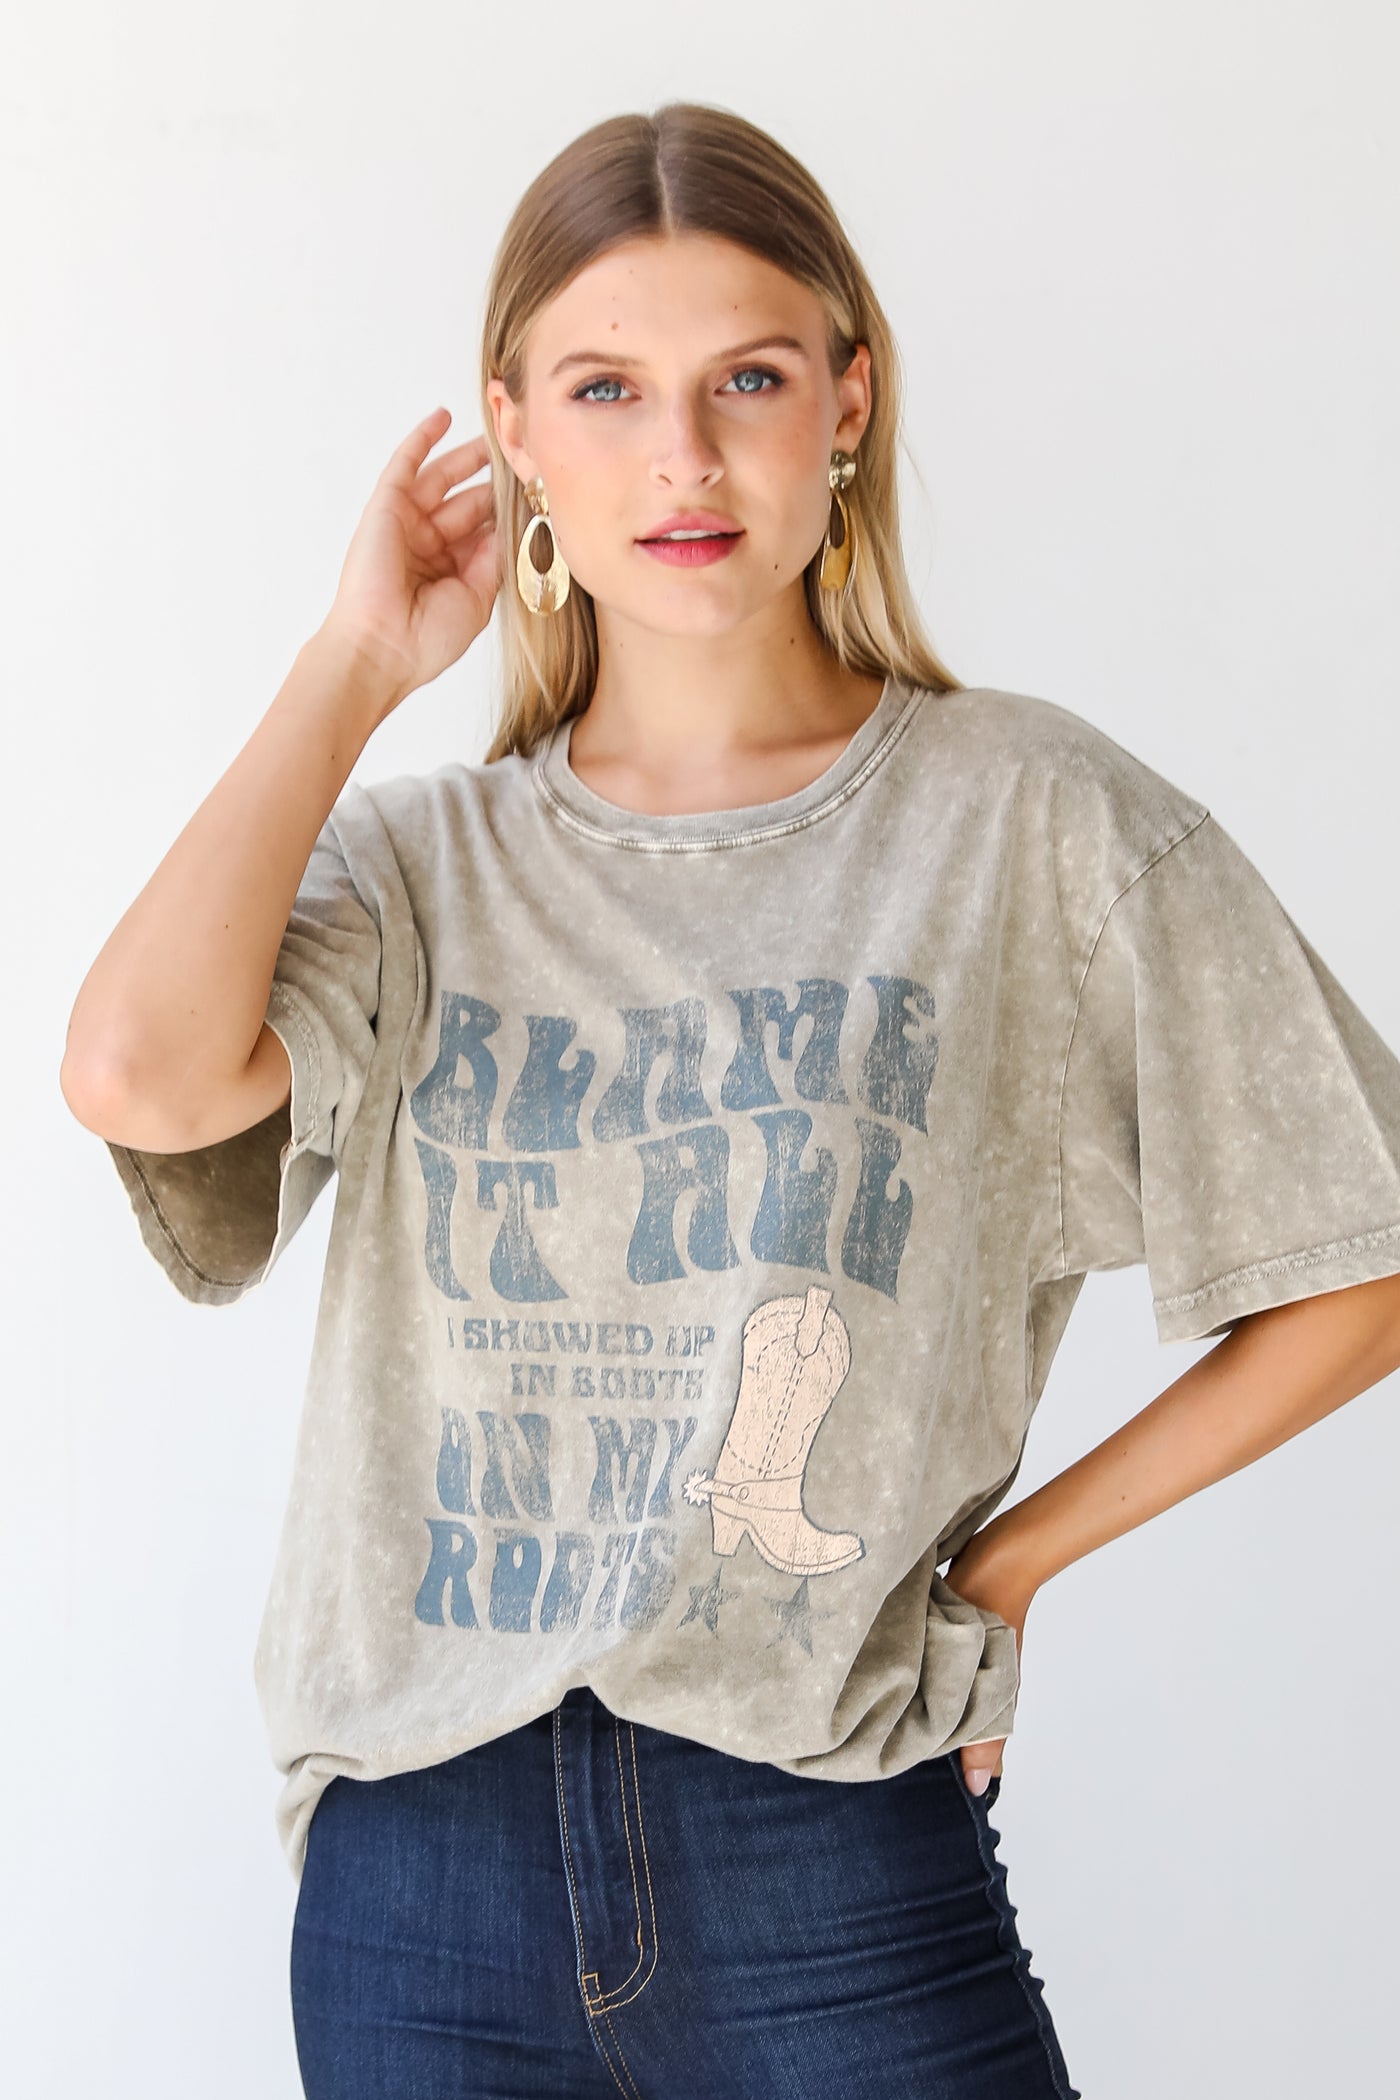 Blame It All On My Boots Graphic Tee